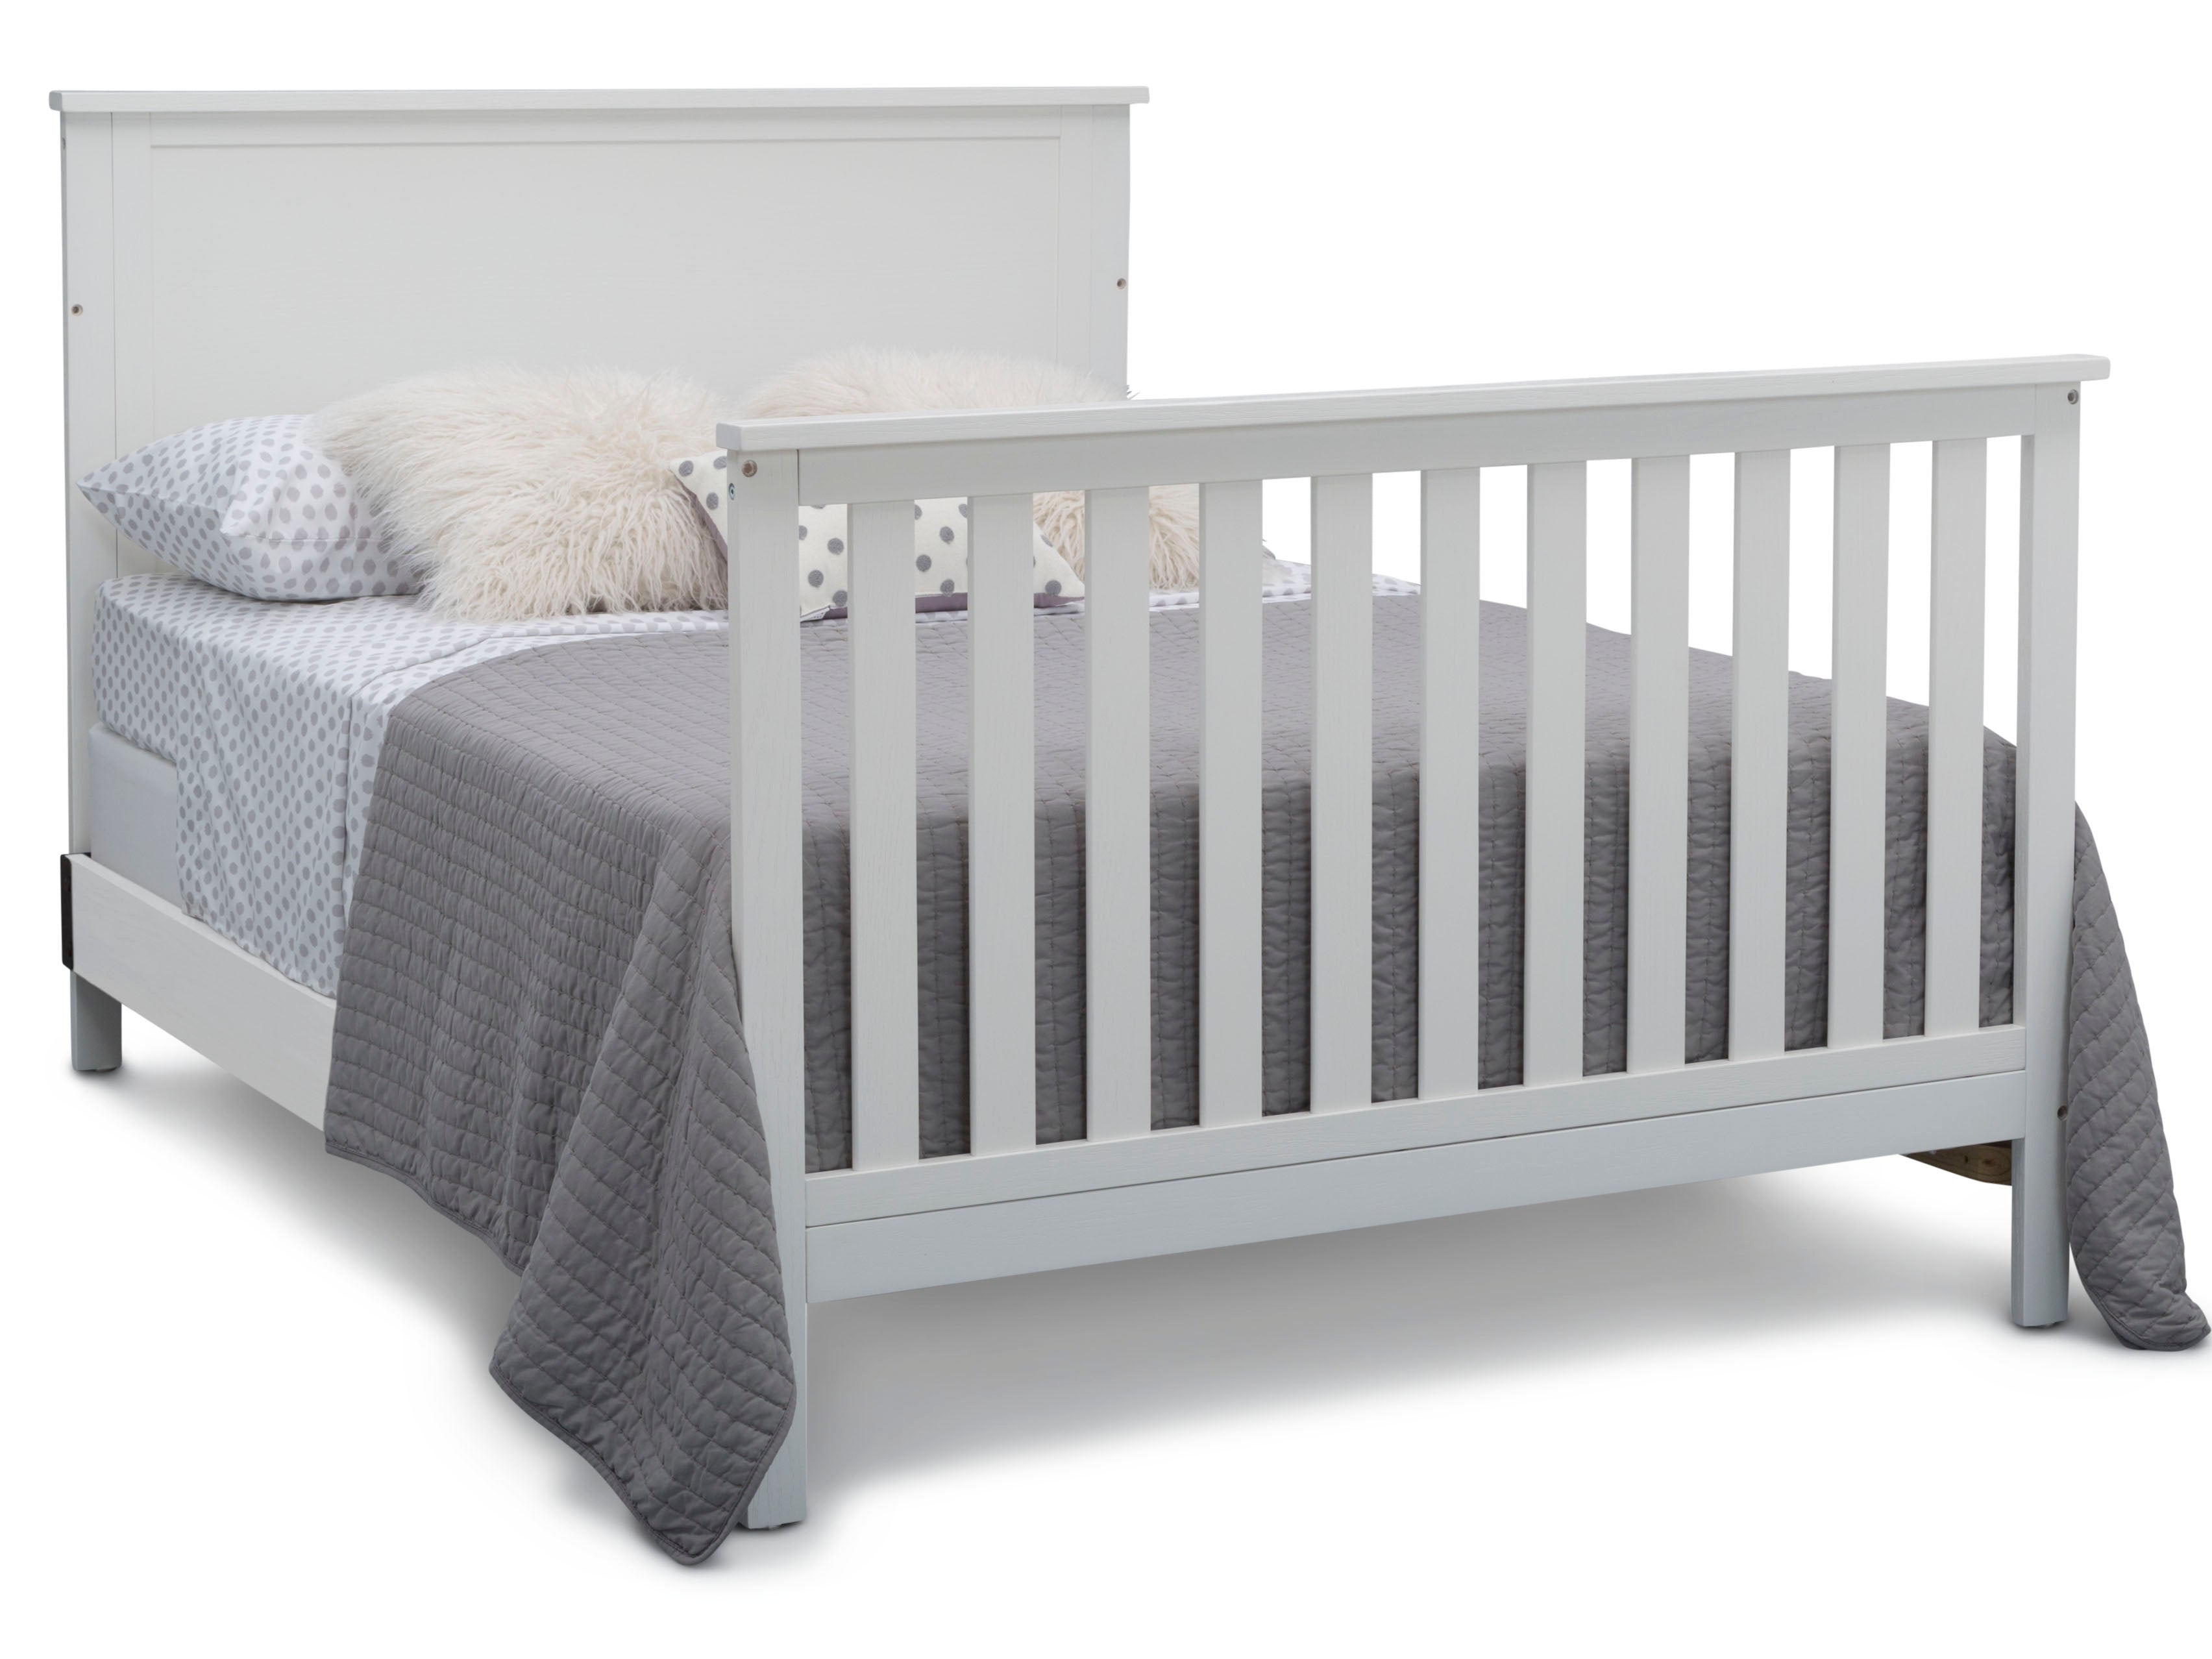 child bed rails for full size bed